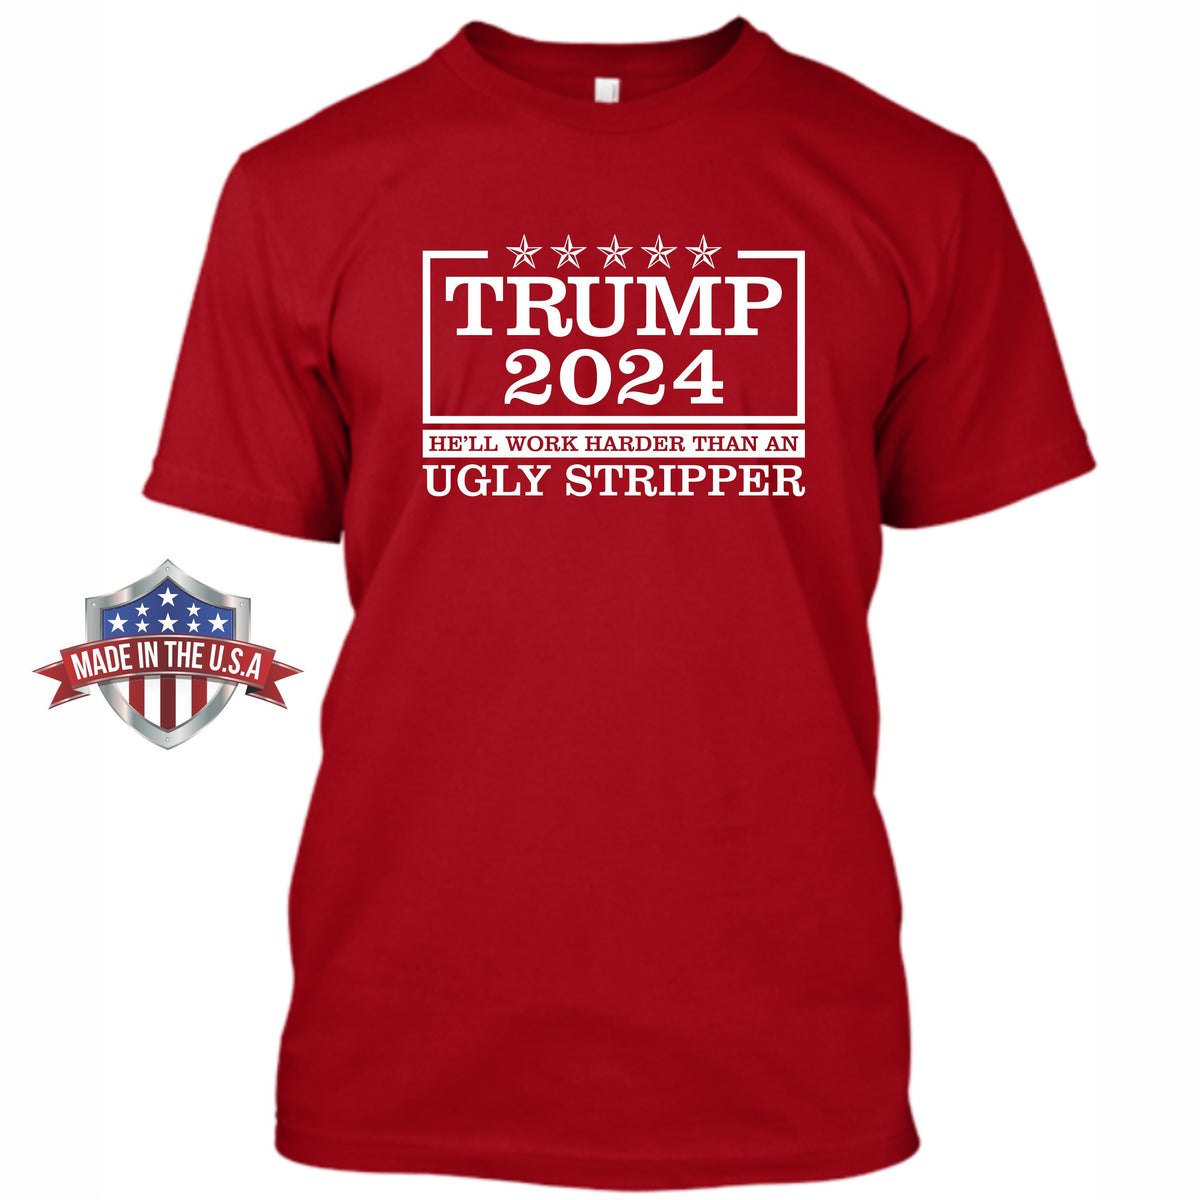 Trump 2024 - He'll Work Harder Than An Ugly Stripper - Front Print